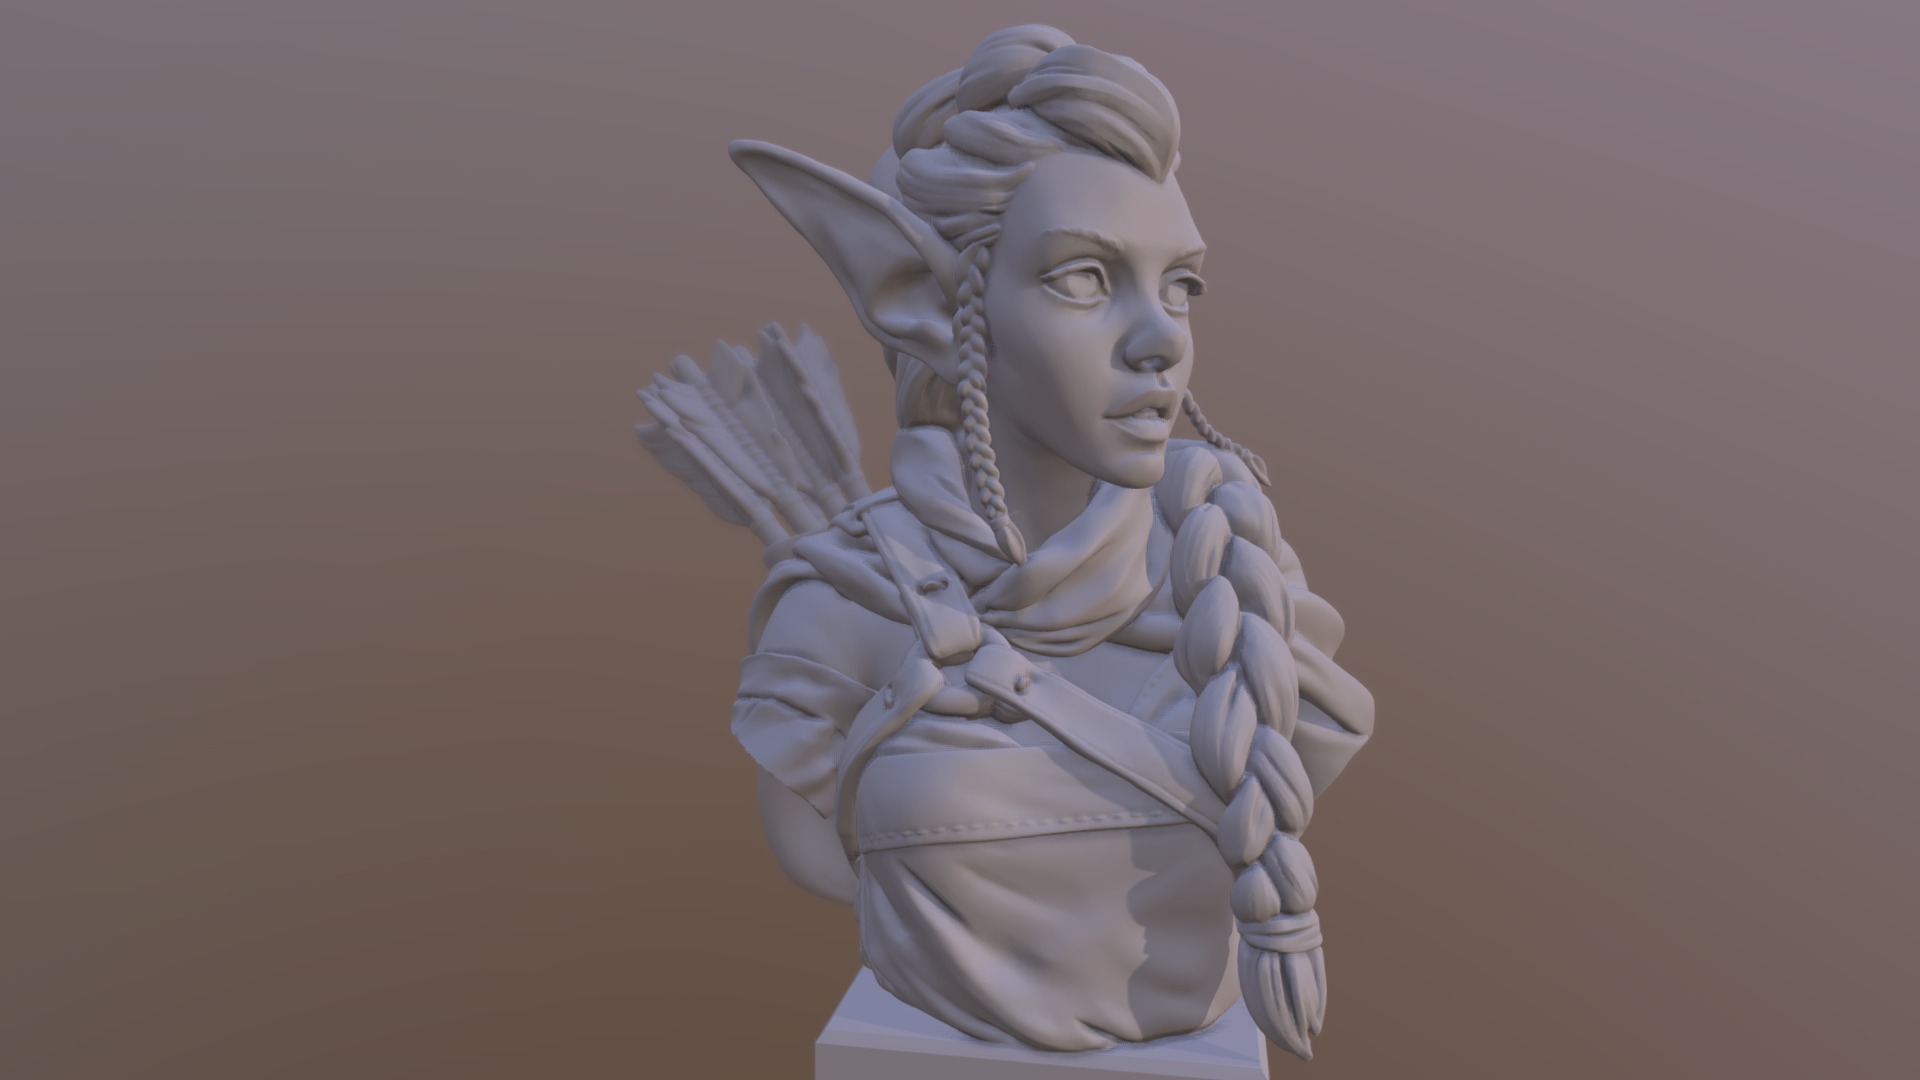 My all purpose test model now. Elfie was originally made for an Artstation challenge, and then repurposed for 3d printing tests.

Pretty high poly mesh decimated in zbrush 3d model